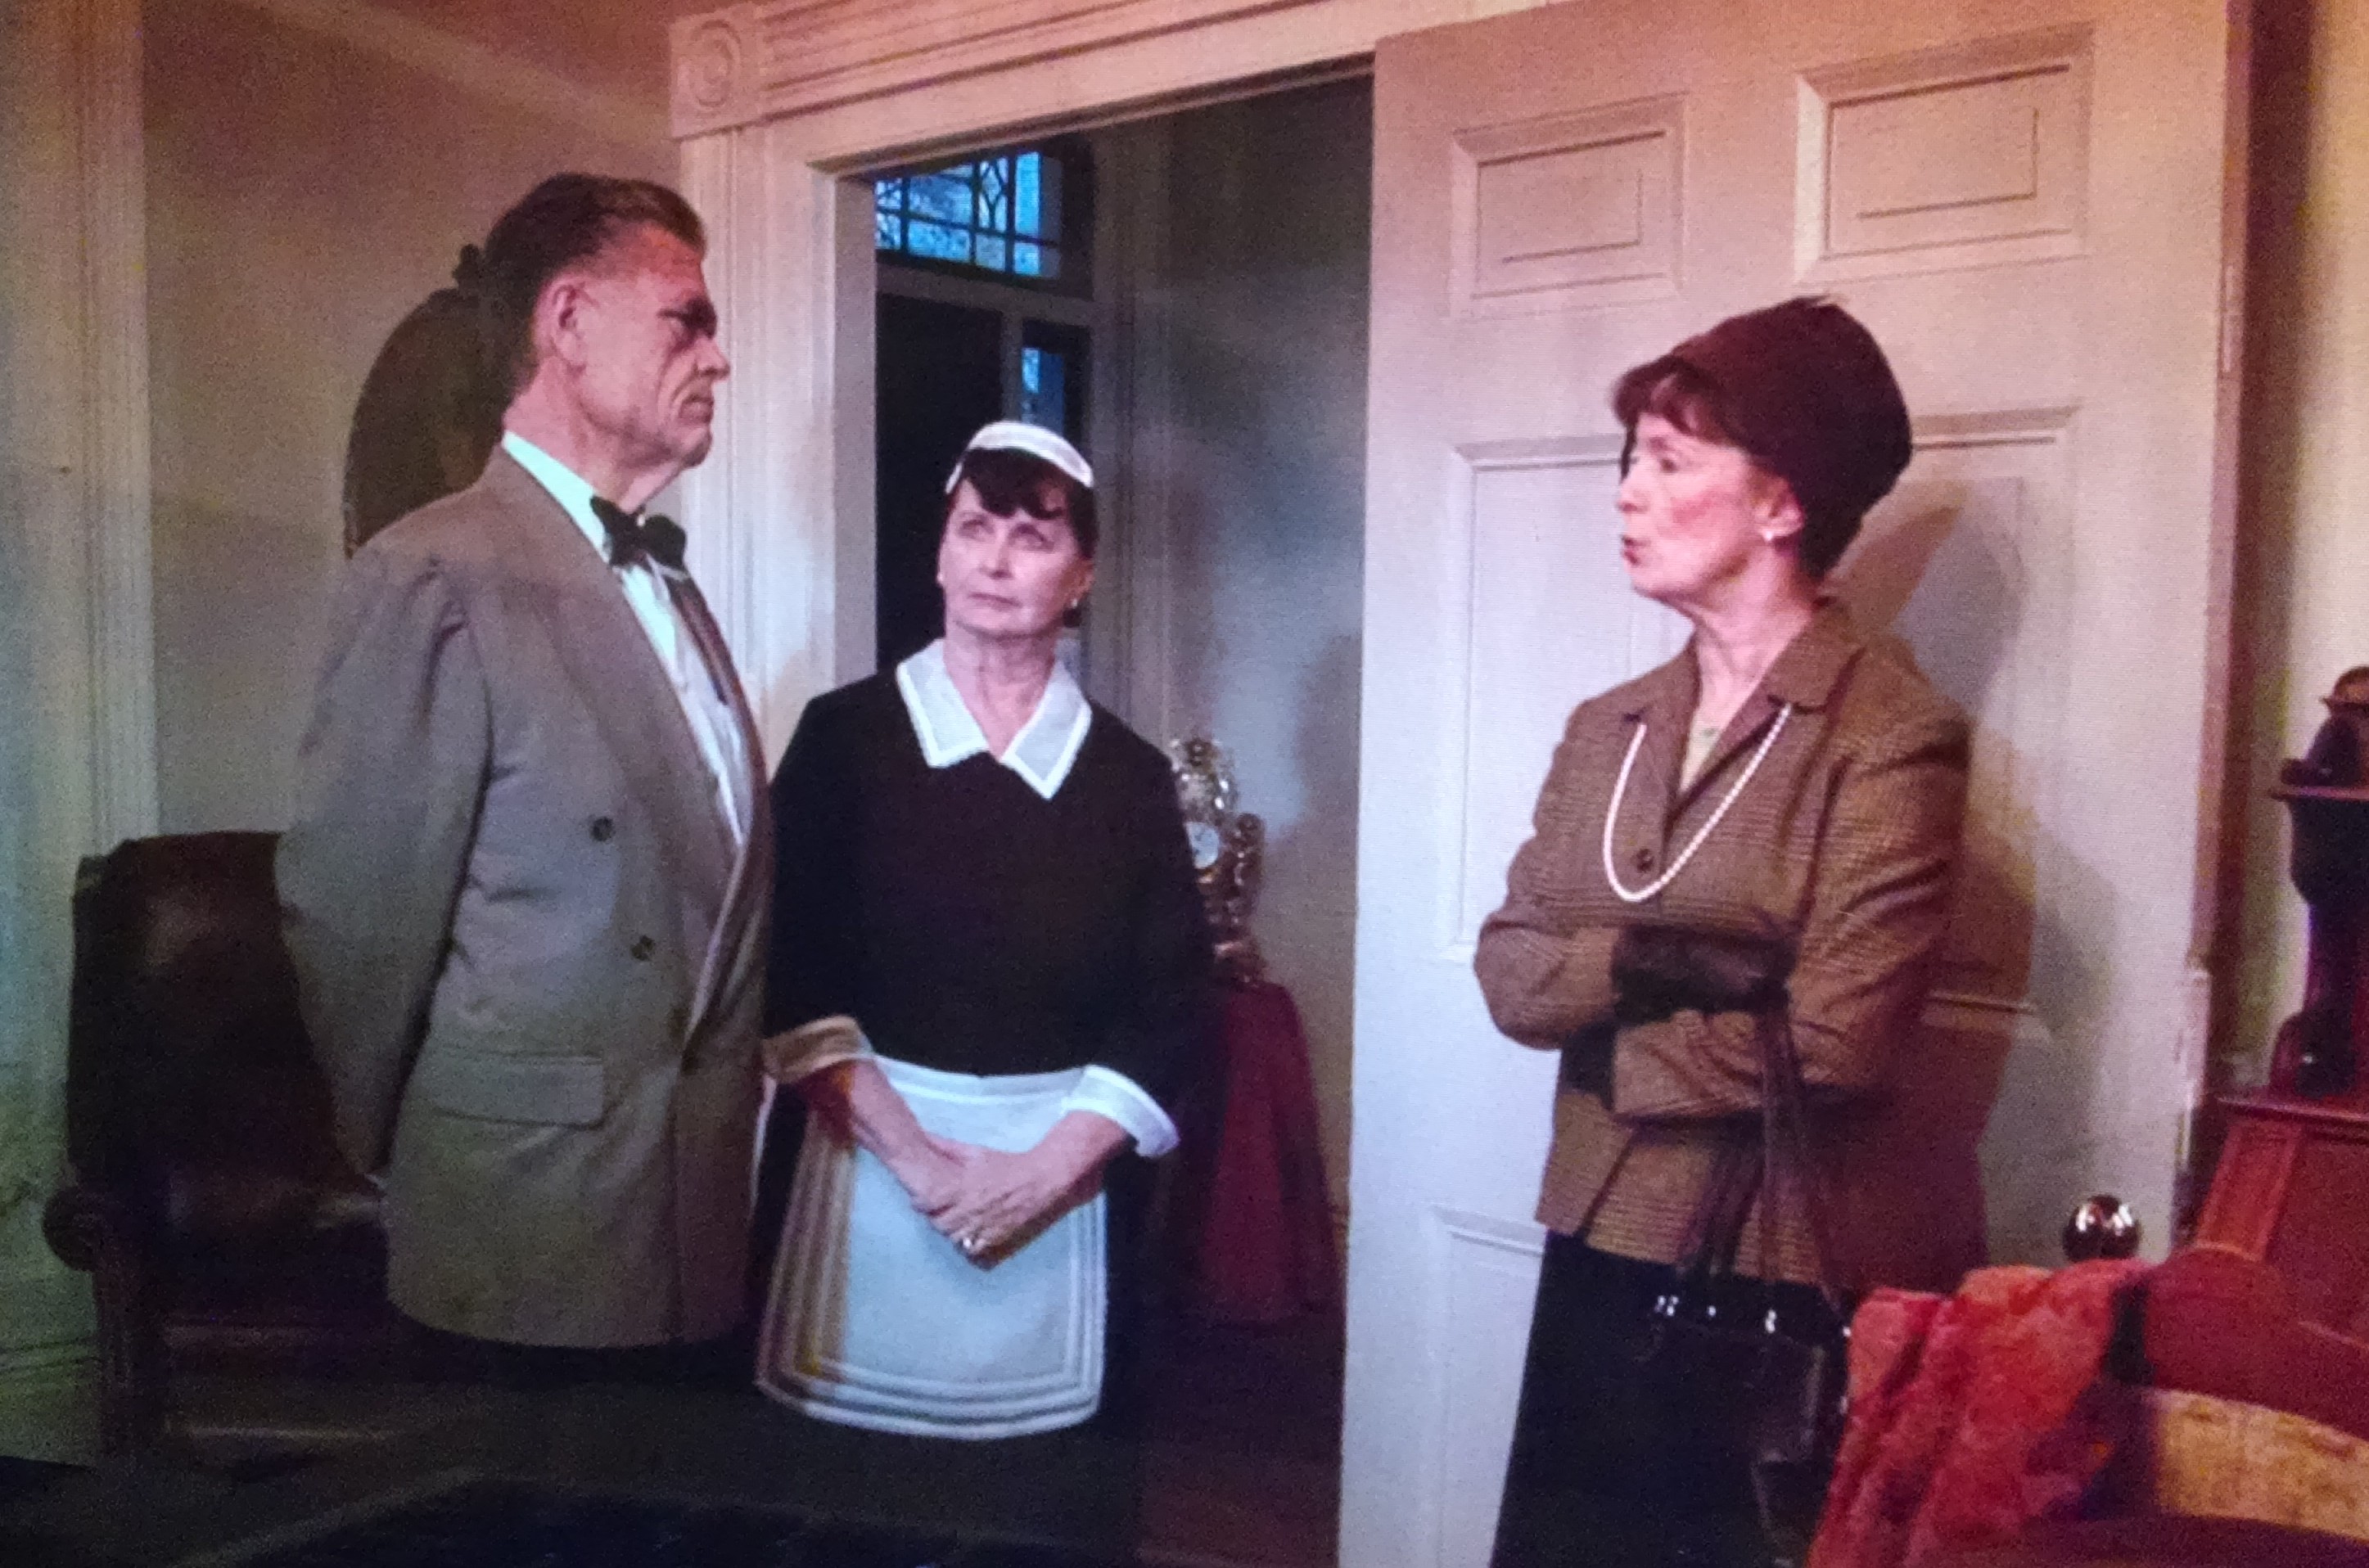 Judge Ryker (Bryan Lassiter), Mrs. Davis (Brenda Moss-Clifton) and Minnie Ryker (Joan Reilly) in Holey Matrimony. A tense moment in Holey Matrimony as Judge Ryker admits his complicity in a conspiracy that he conveniently blocked from his memory.